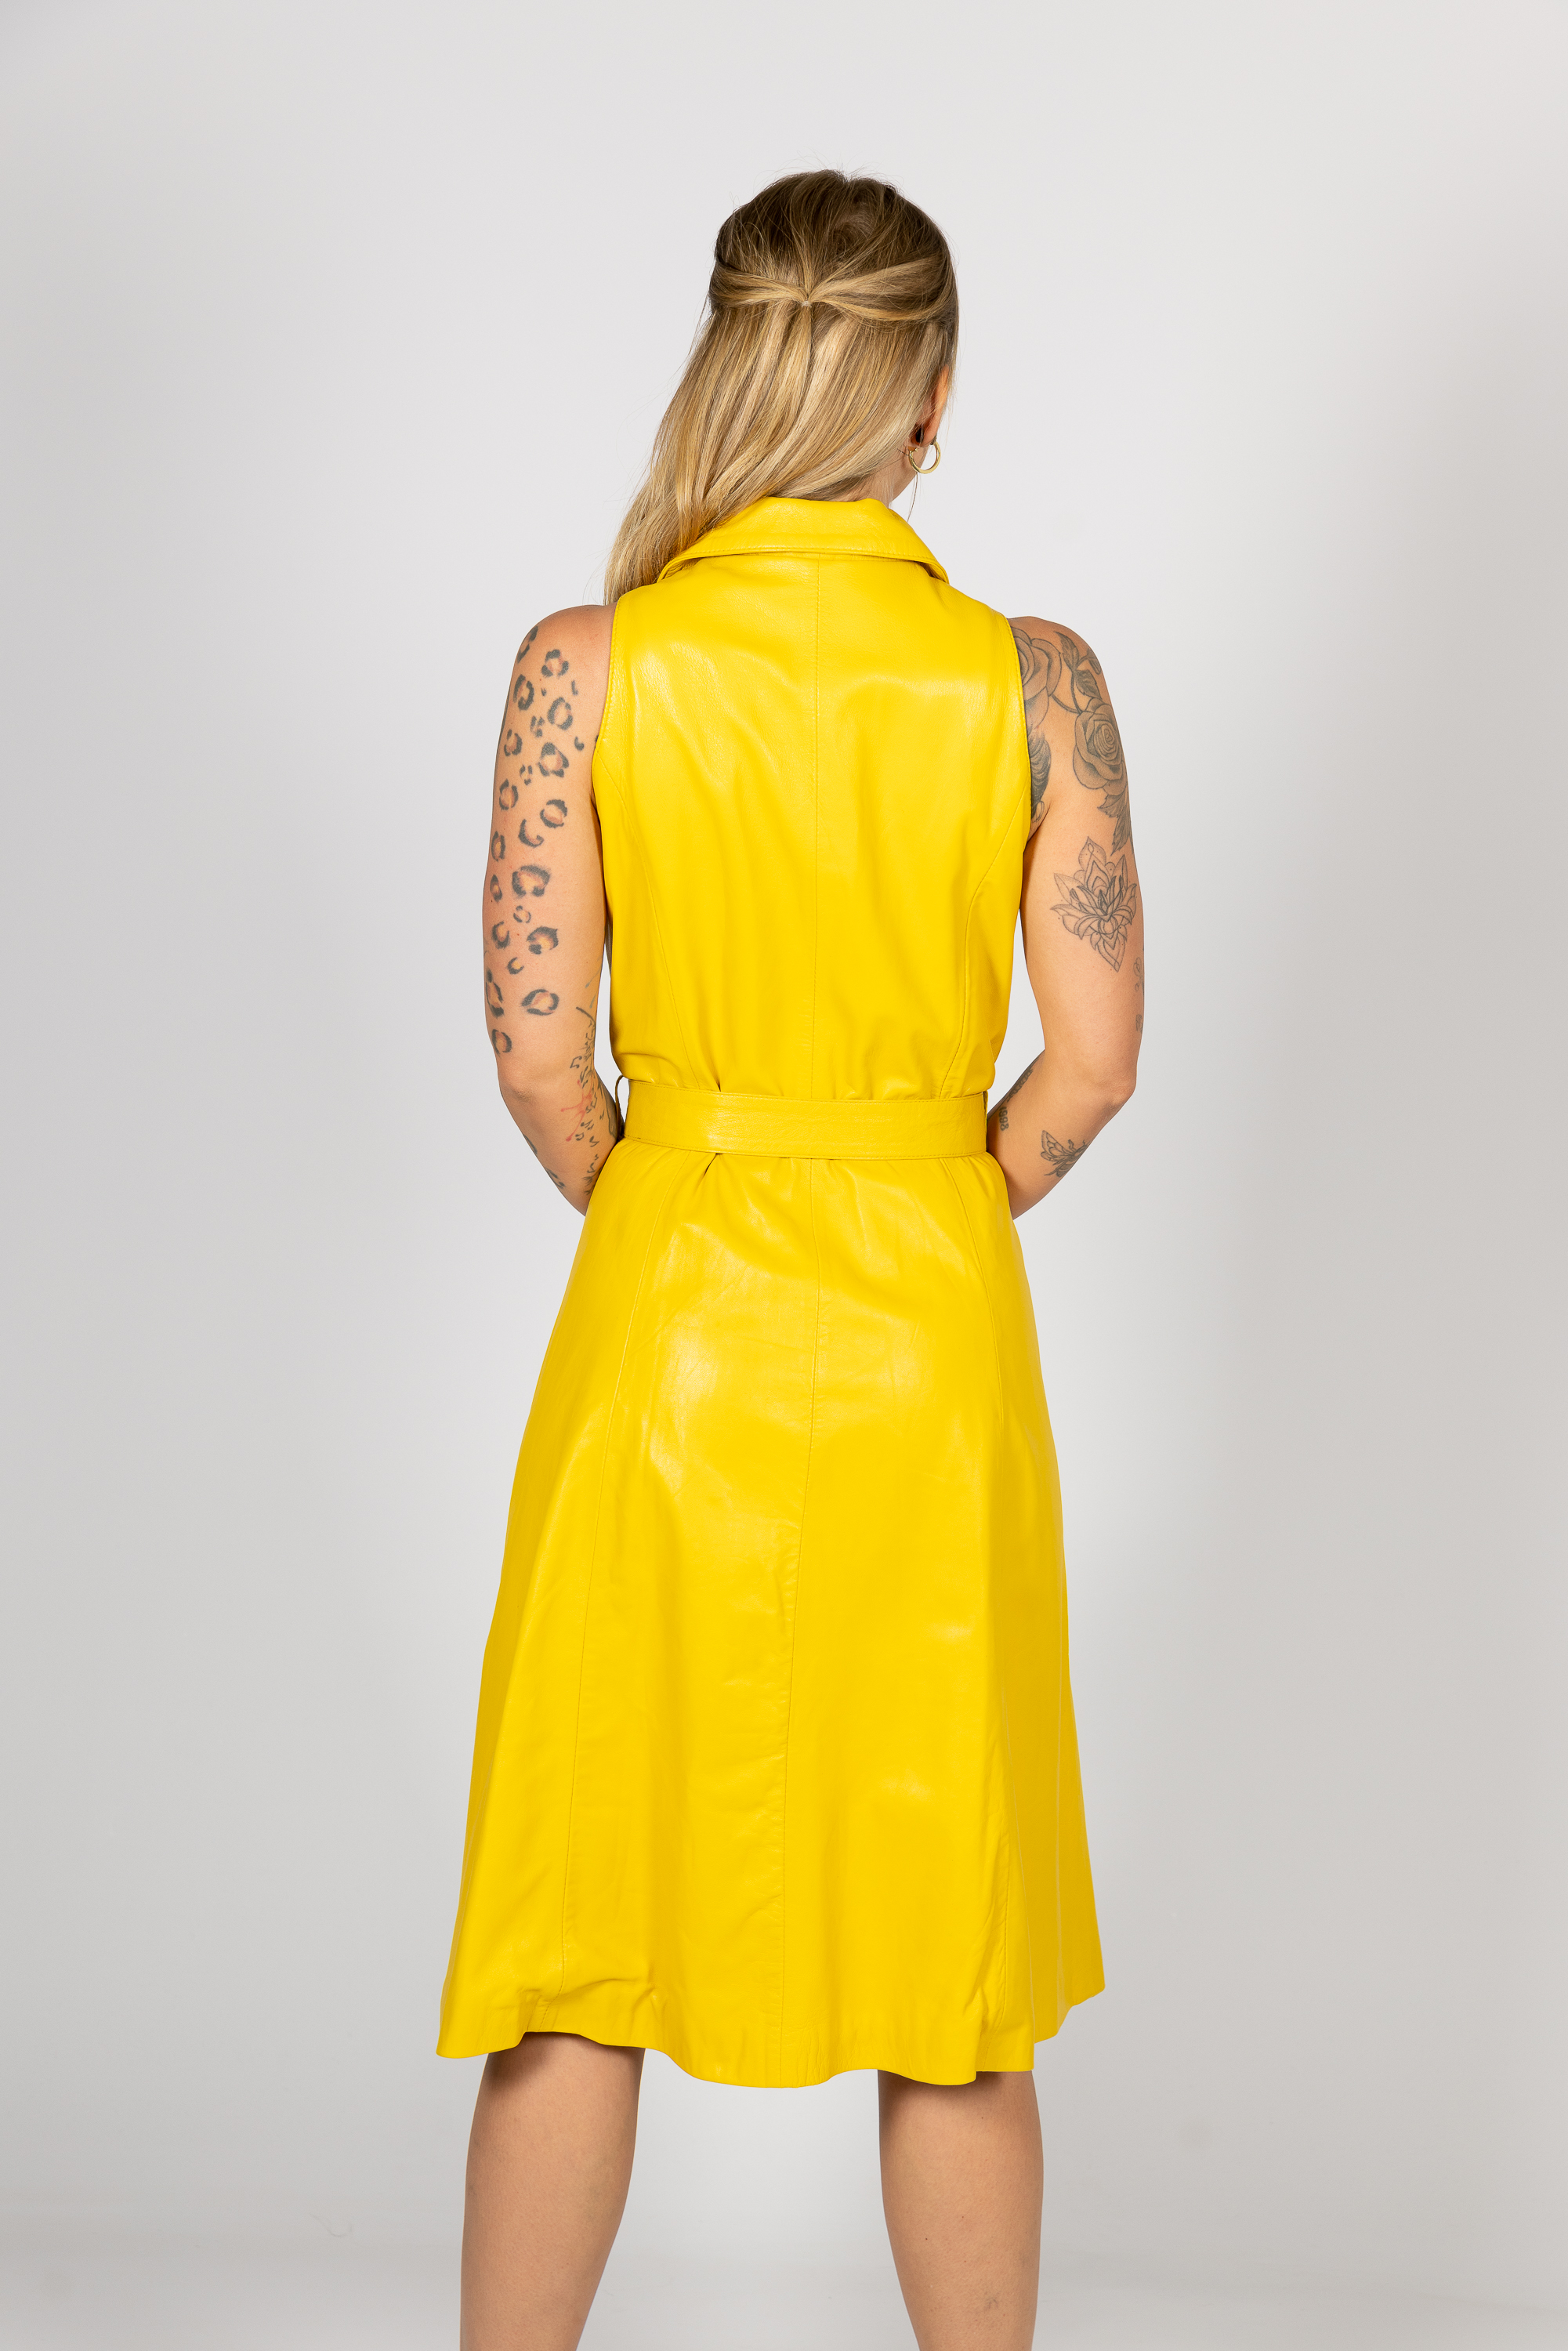 Leather Dress as Wrap Dress in GENUINE LEATHER in yellow